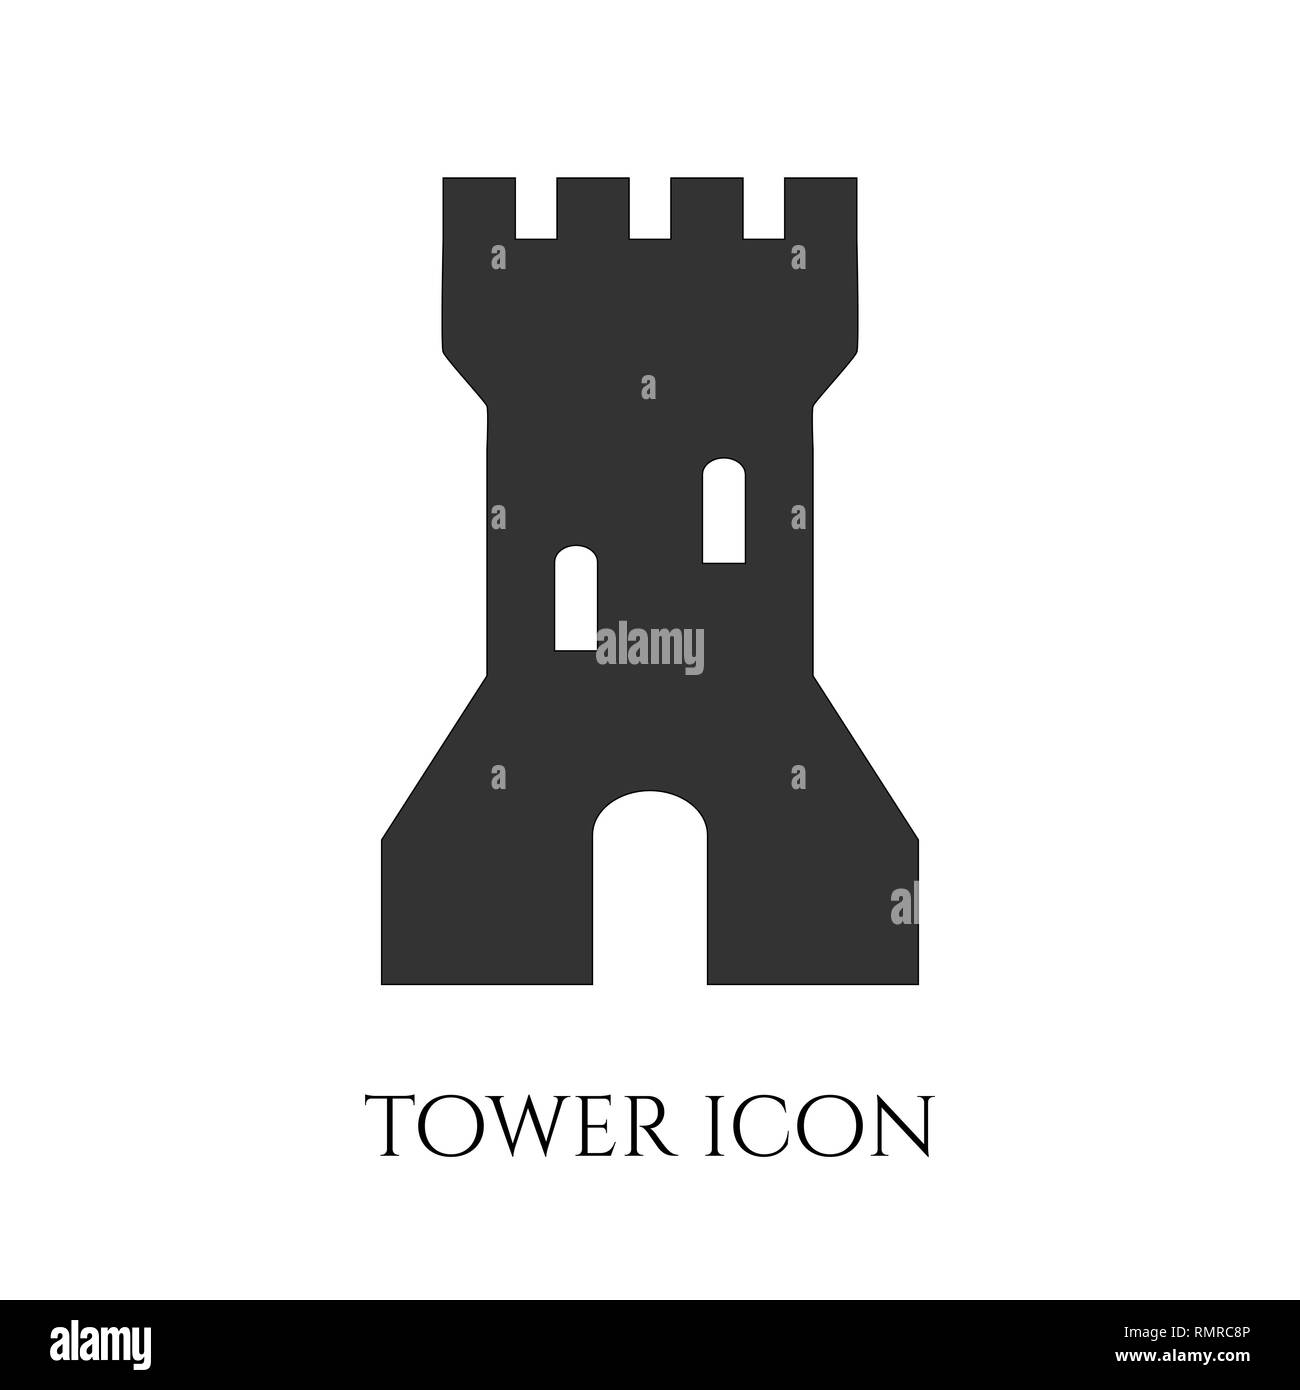 tower symbol icon isolated on white background Stock Vector